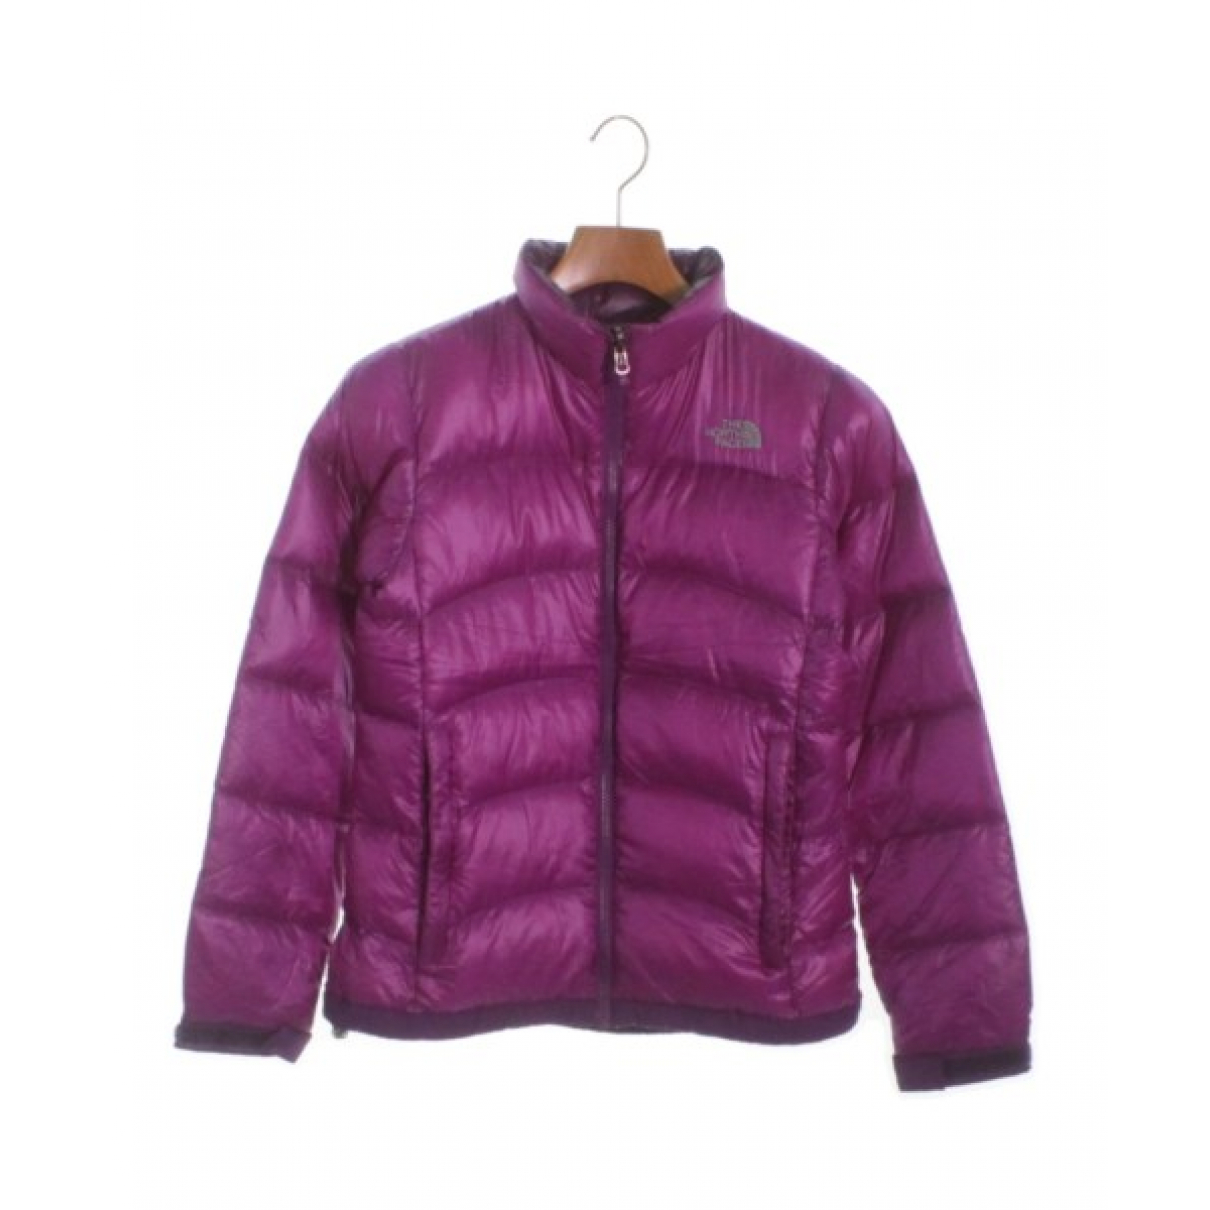 Our shop most popular Bargain Puffer